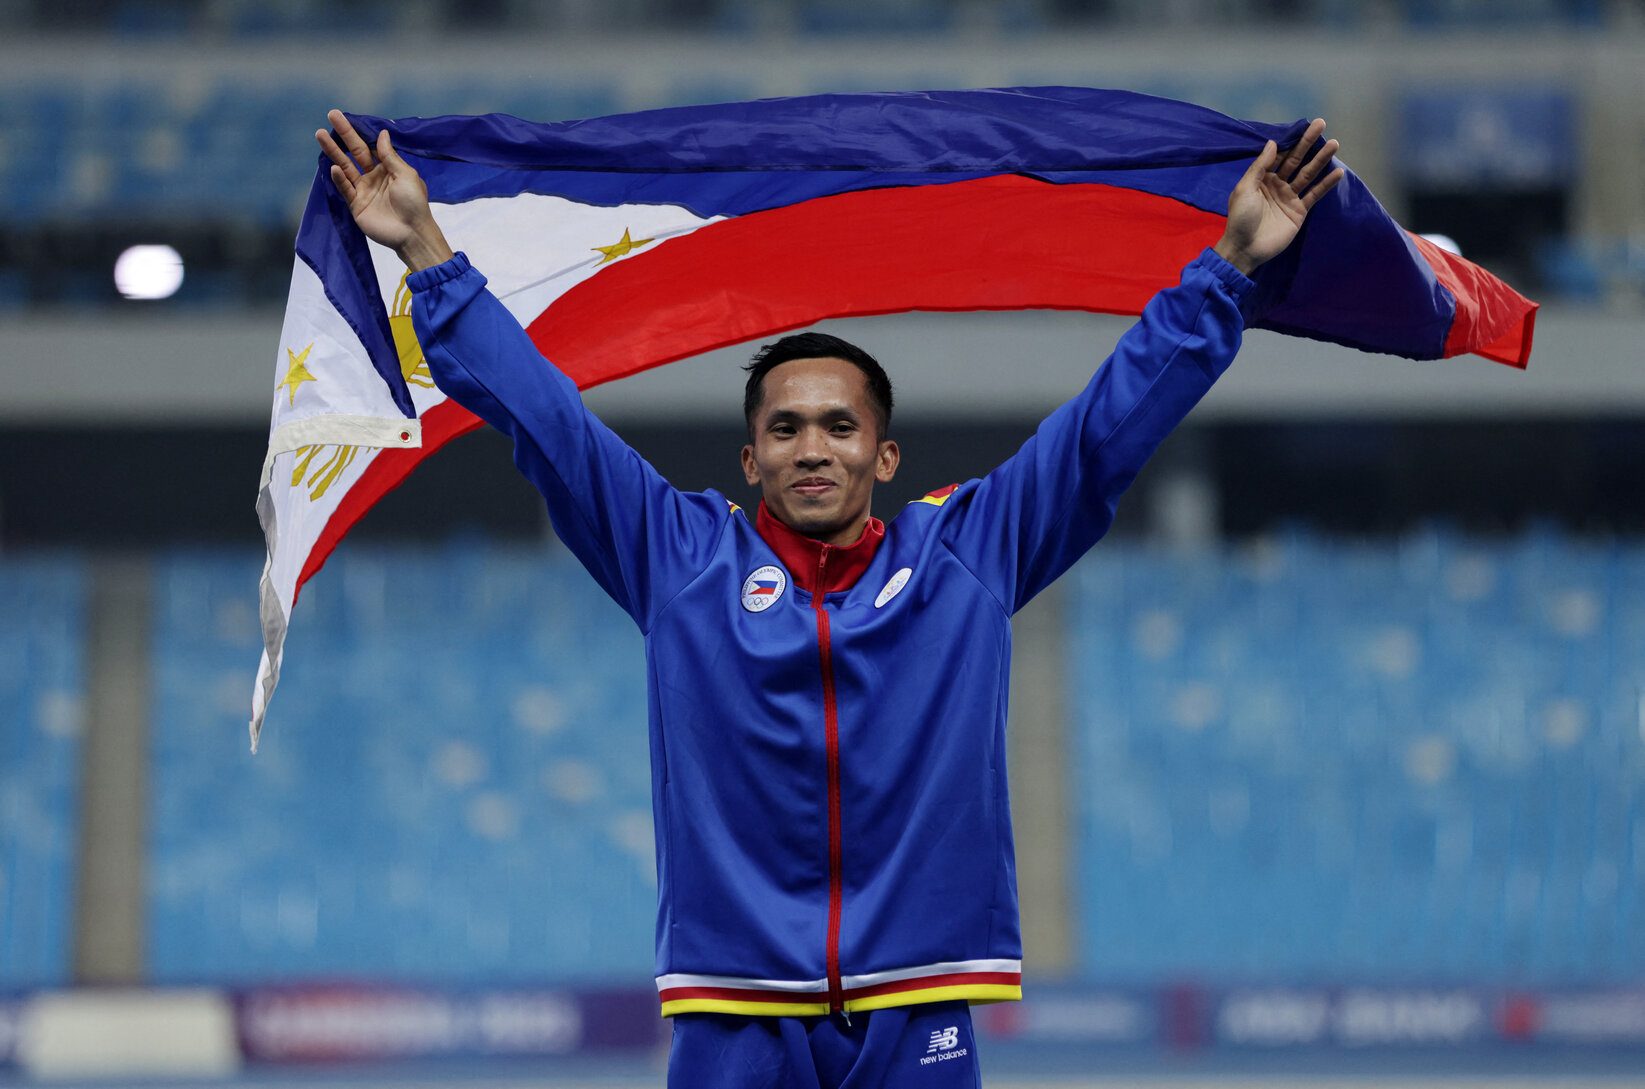 Janry Ubas bags elusive SEA Games gold after eight-year wait